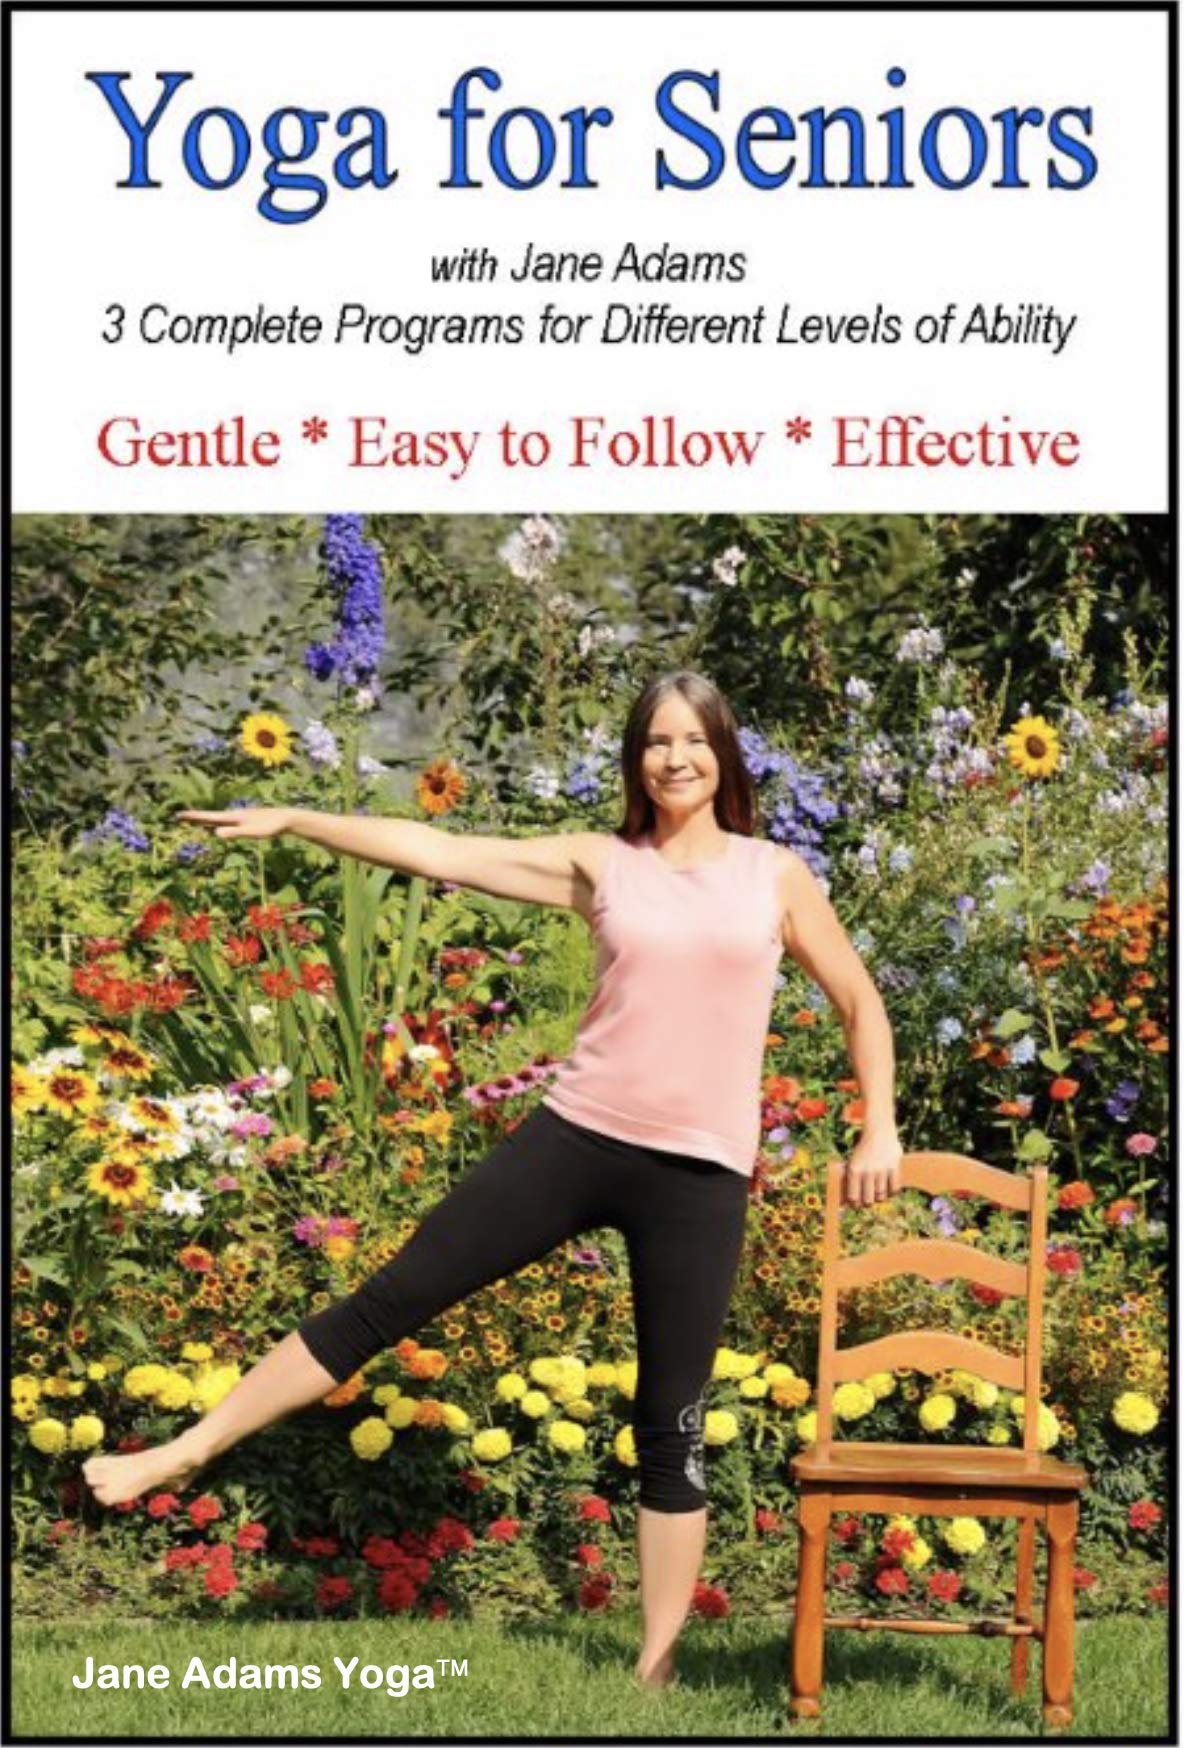 Book Cover Yoga for Seniors with Jane Adams (2nd edition): Improve Balance, Strength & Flexibility with Gentle Senior Yoga, now with 3 complete practices.